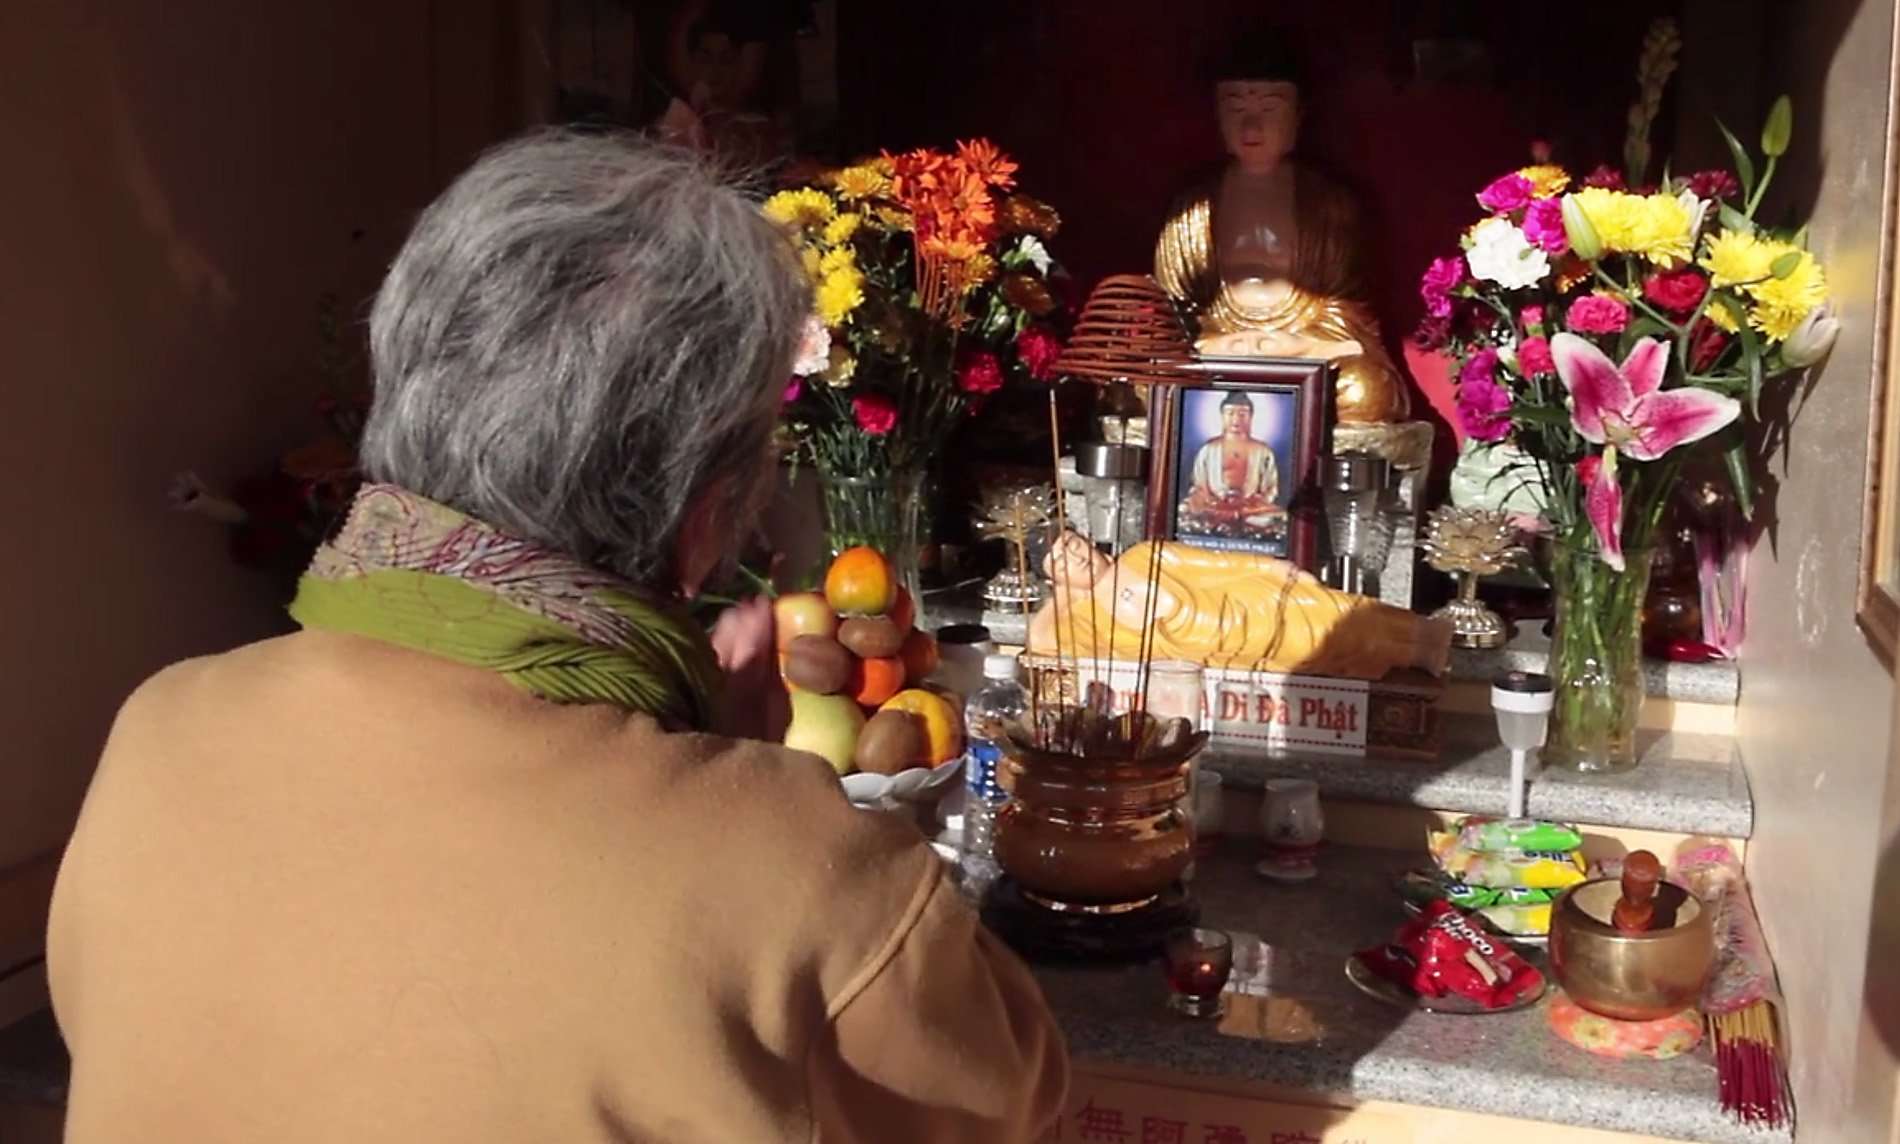 image for TIL about the Oakland Buddha, placed by a resident on a street corner to prevent illegal dumping, the statue has now become a shrine for the local Vietnamese population who leave offerings and have even built a shelter for the Buddah. Crime in the area dropped 82%